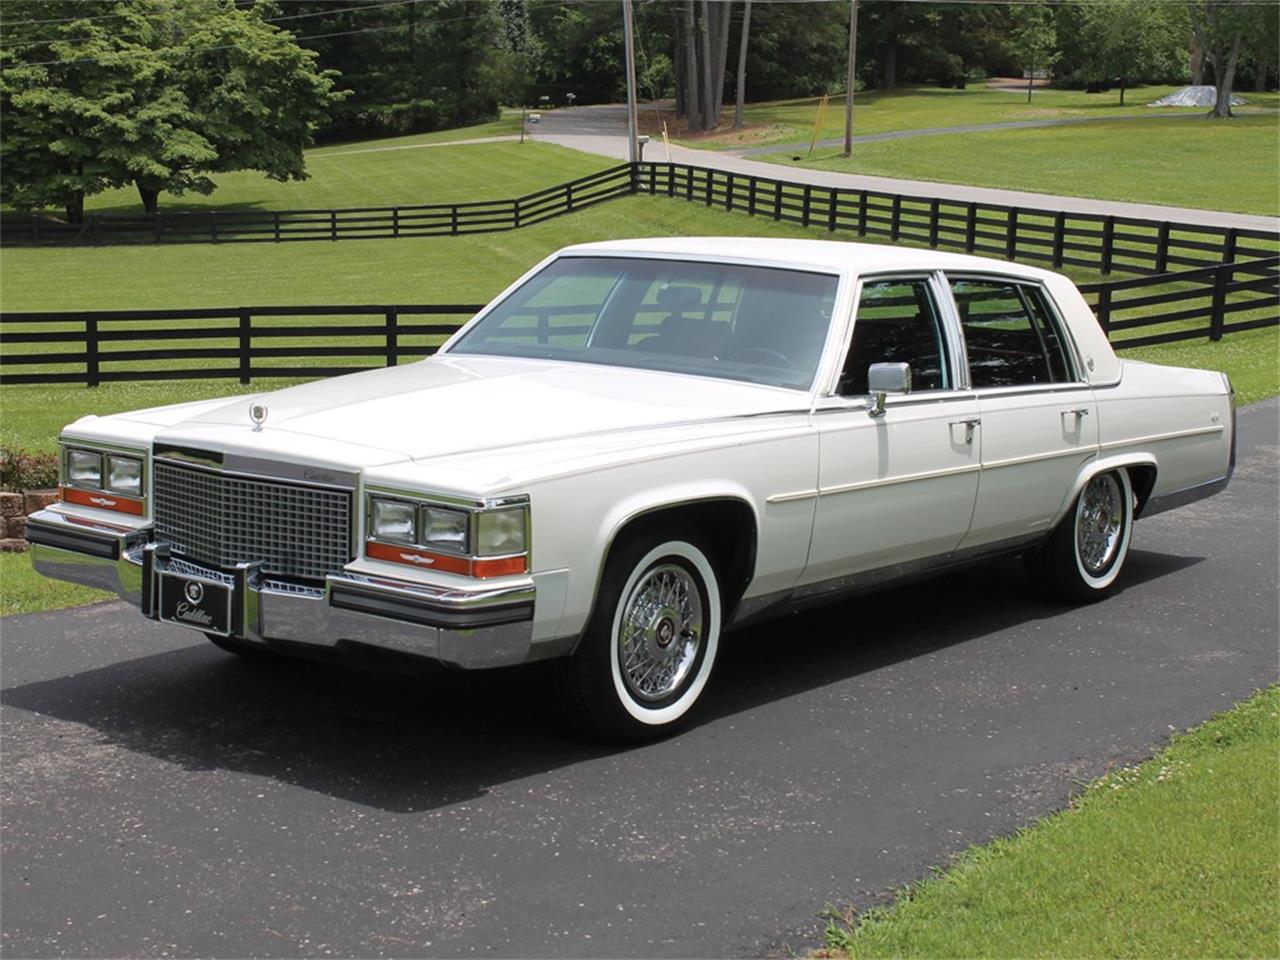 For Sale at Auction: 1988 Cadillac Brougham for sale in Auburn, IN